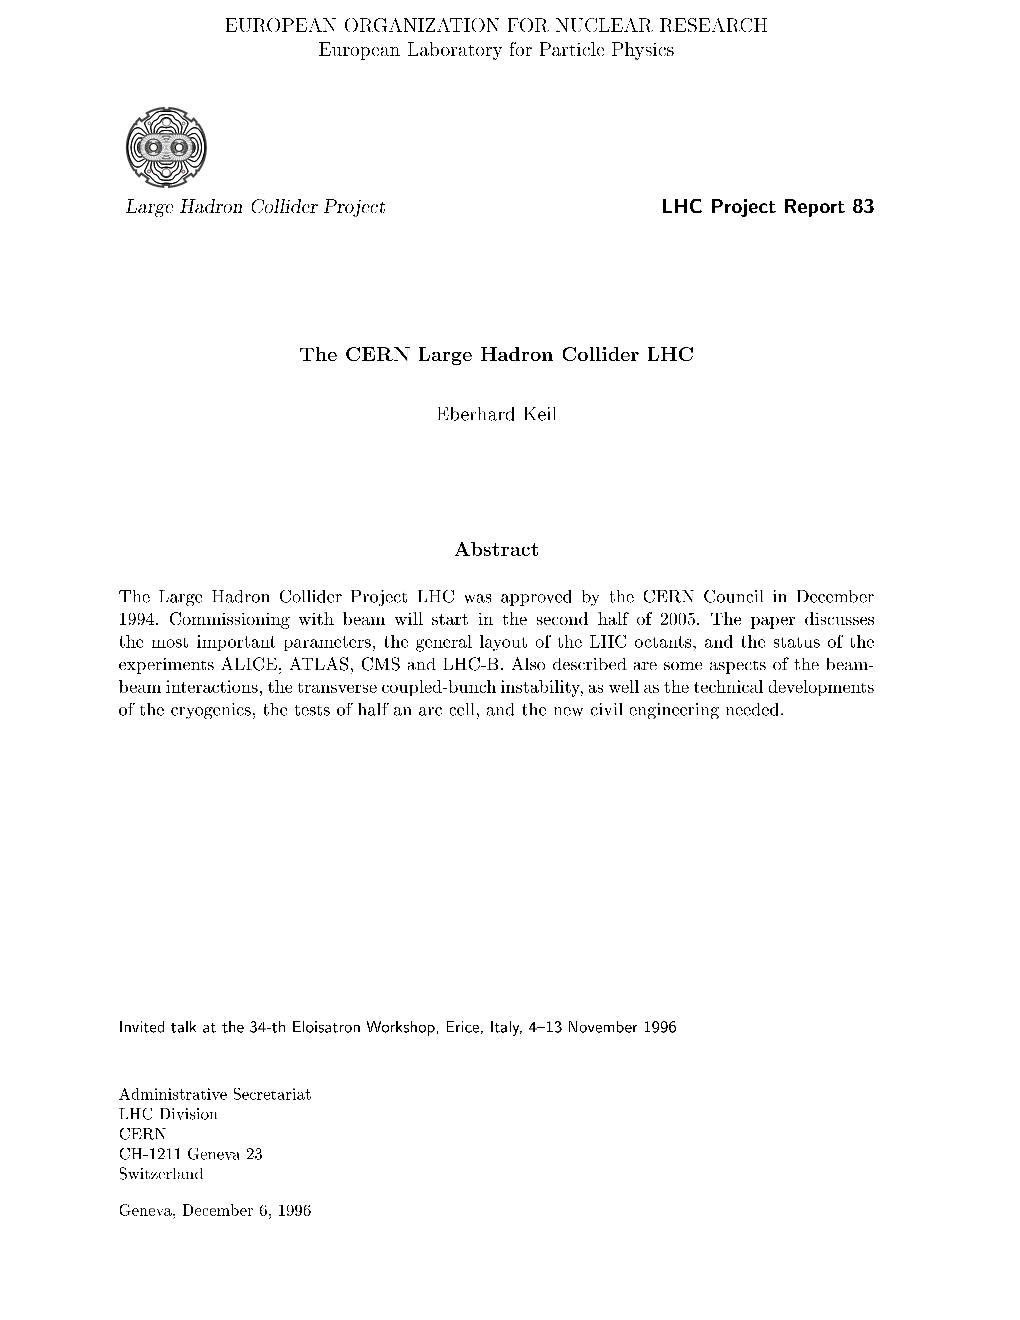 The CERN Large Hadron Collider LHC Abstract